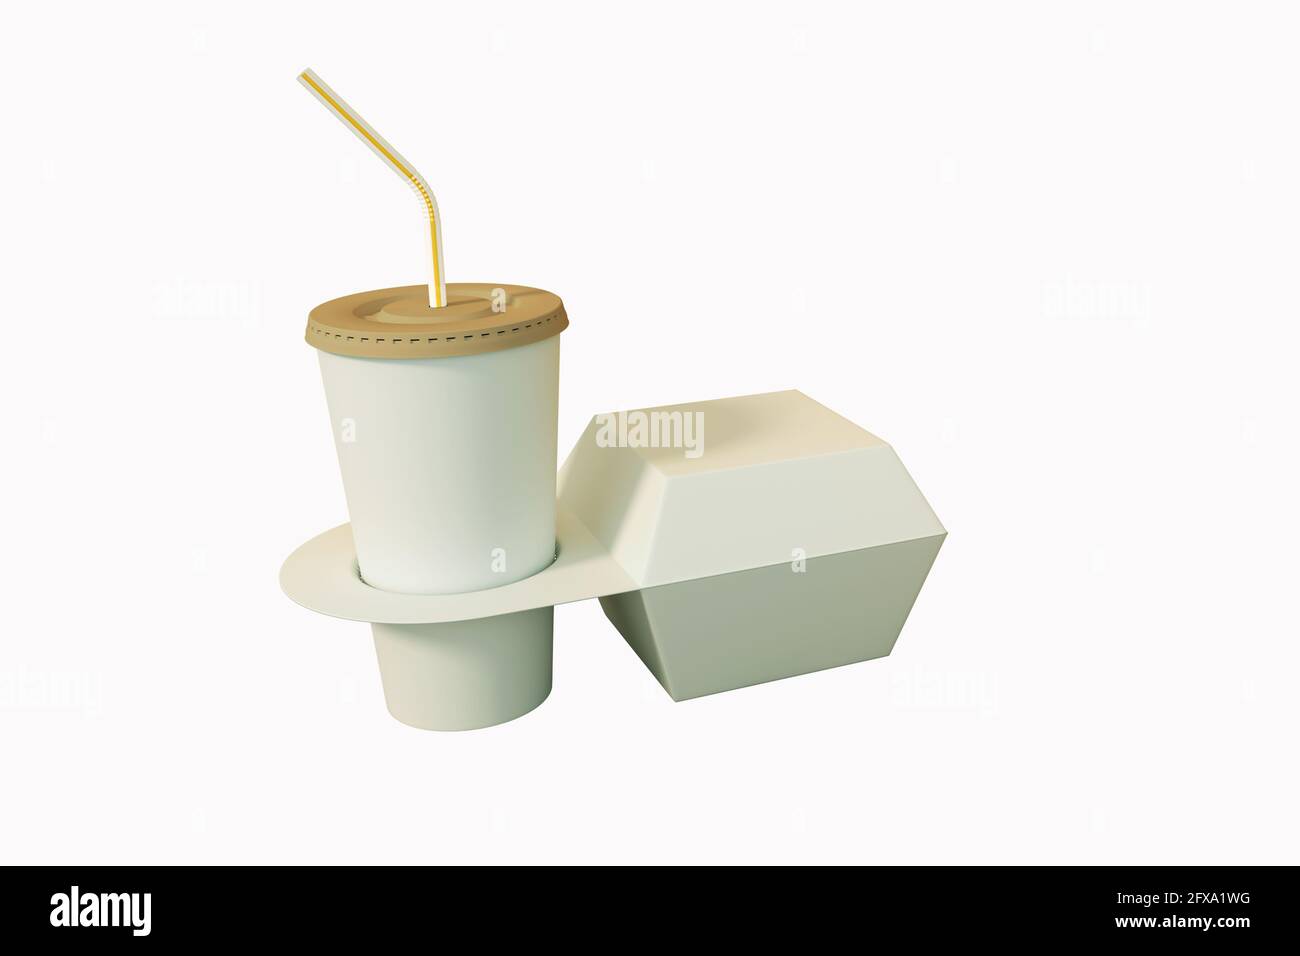 Fast food packaging set. Paper coffee cups in holder, food box 3D rendering. Stock Photo